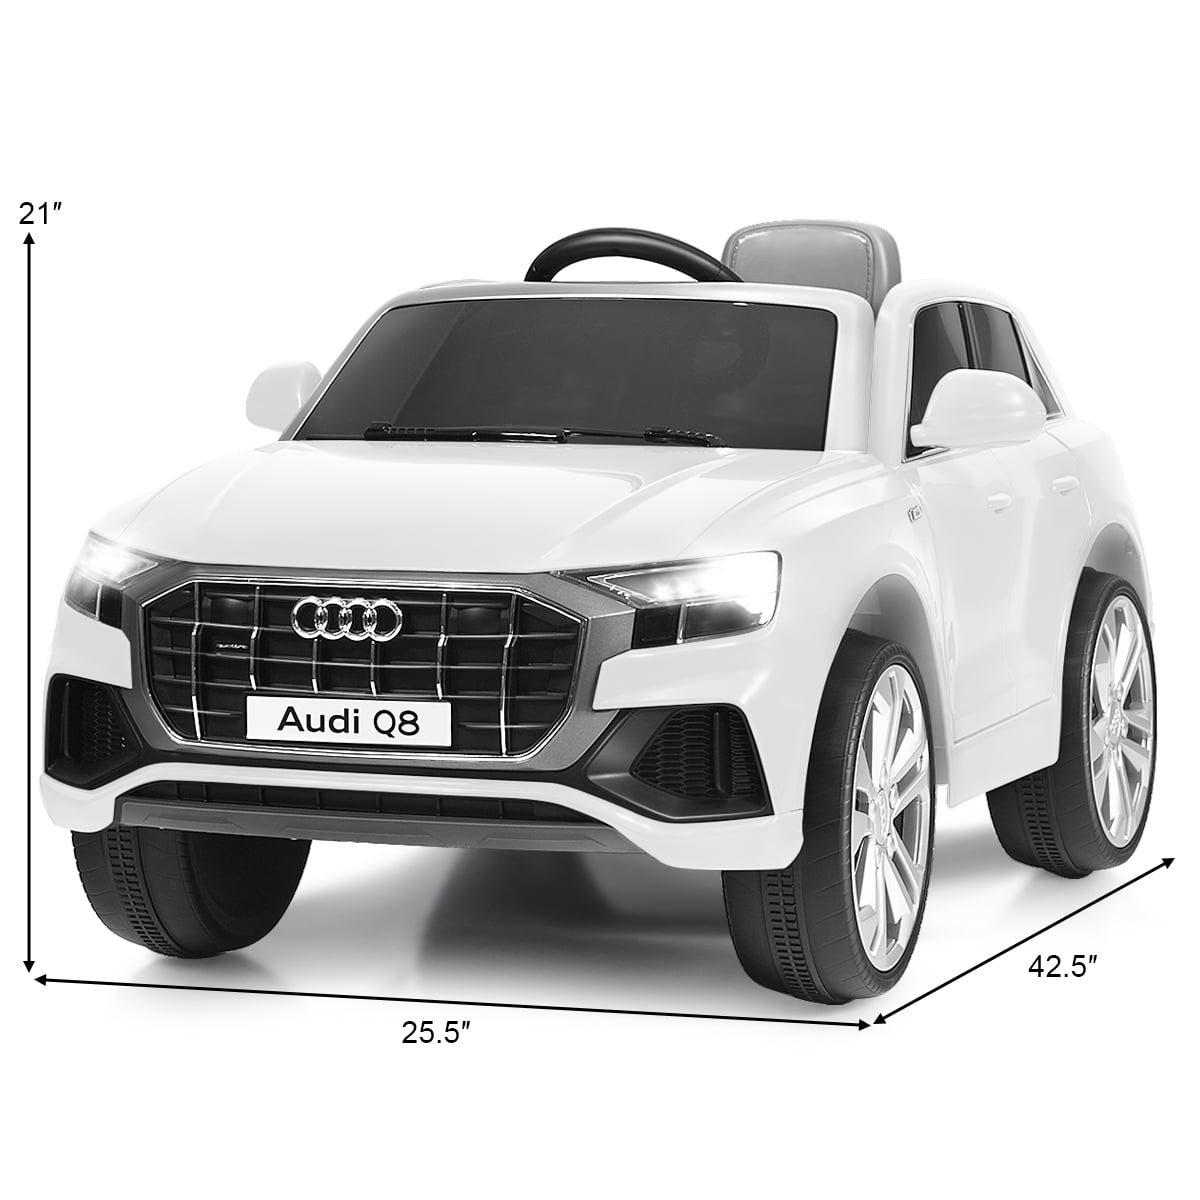 Horn 2.4G Remote Control Kids Ride on Toys for Boys & Girls,Black MP3 LED Lights Licensed Audi Q8,12V Battery Powered Electric Vehicle w/2 Motors Costzon Ride on Car Spring Suspension Music 